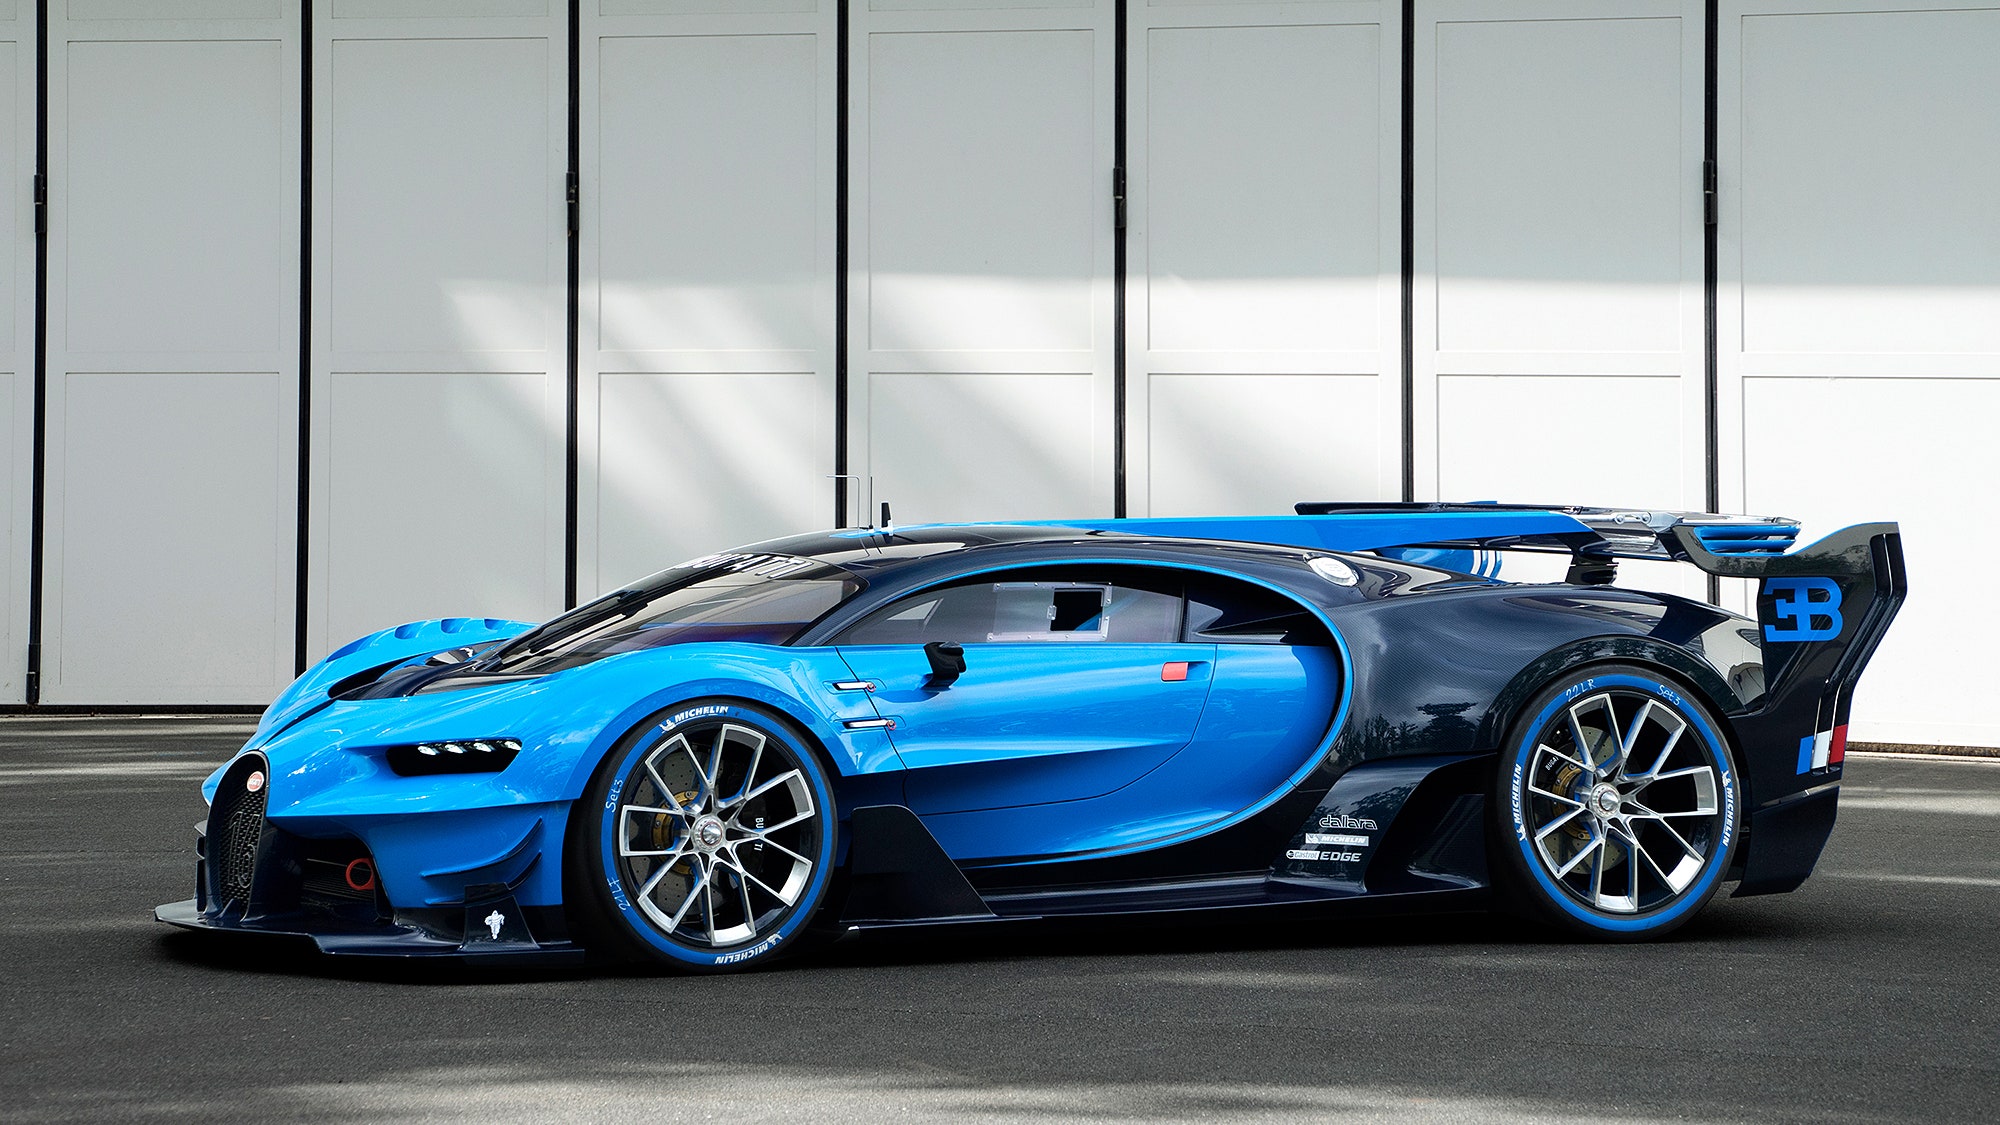 Detail Images Of Bugatti Cars Nomer 13